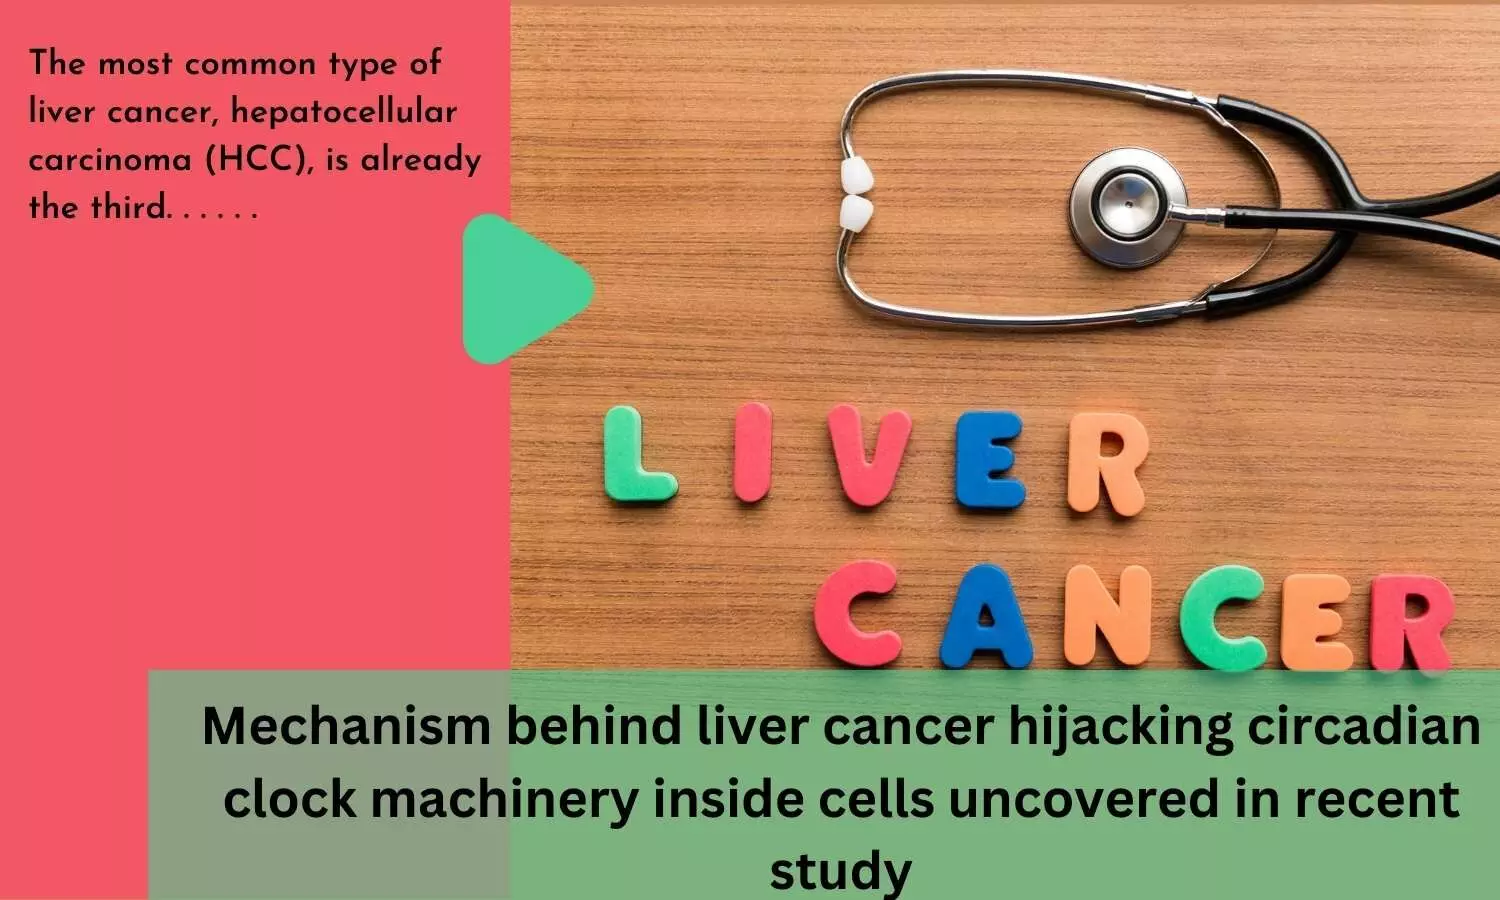 Mechanism behind liver cancer hijacking circadian clock machinery inside cells uncovered in recent study